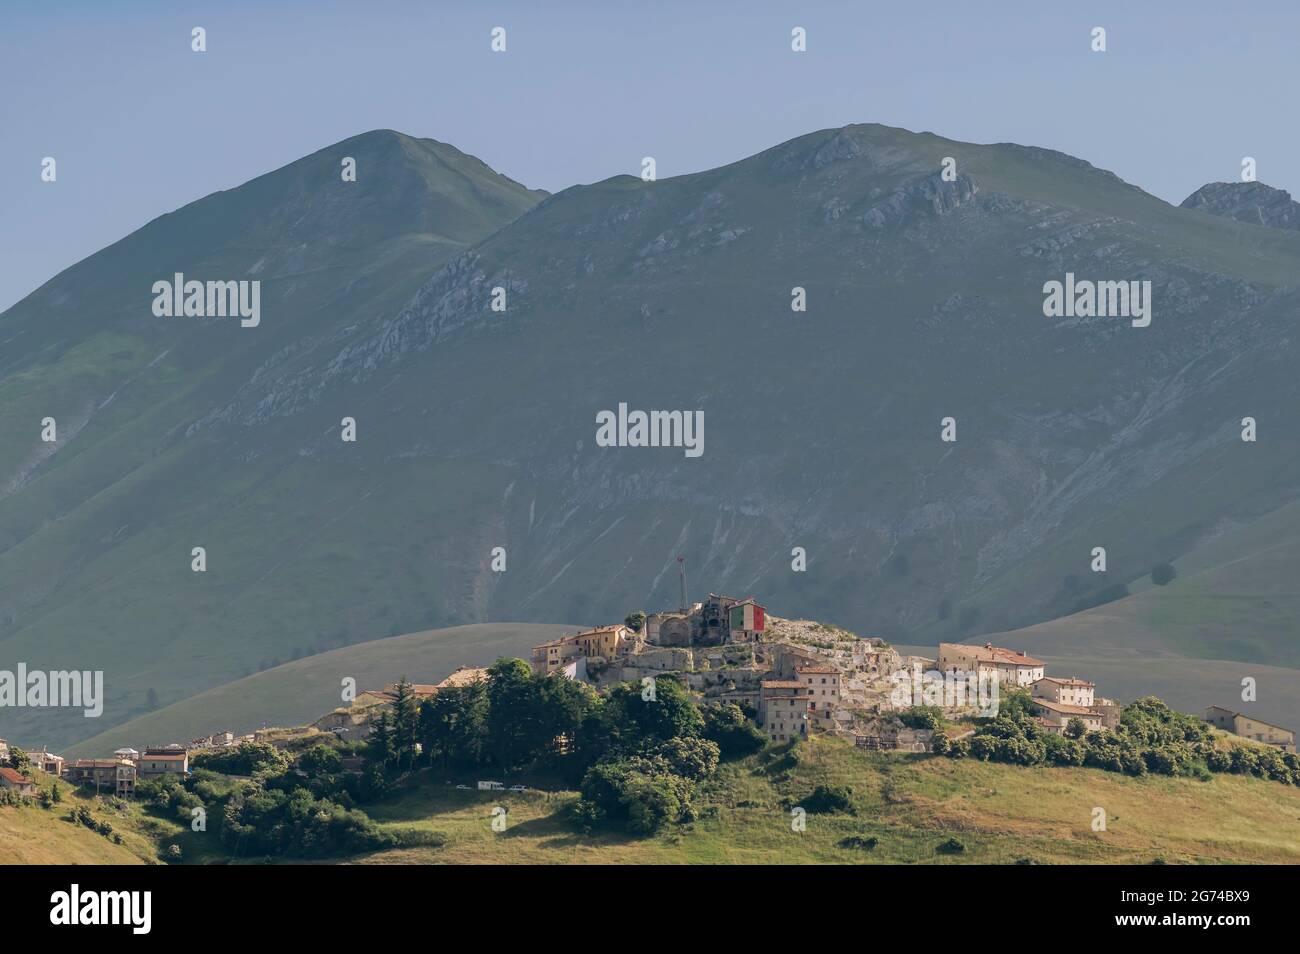 The village of Castelluccio di Norcia, Italy, in the park of the Sibillini Mountains, destroyed by the 2016 earthquake Stock Photo